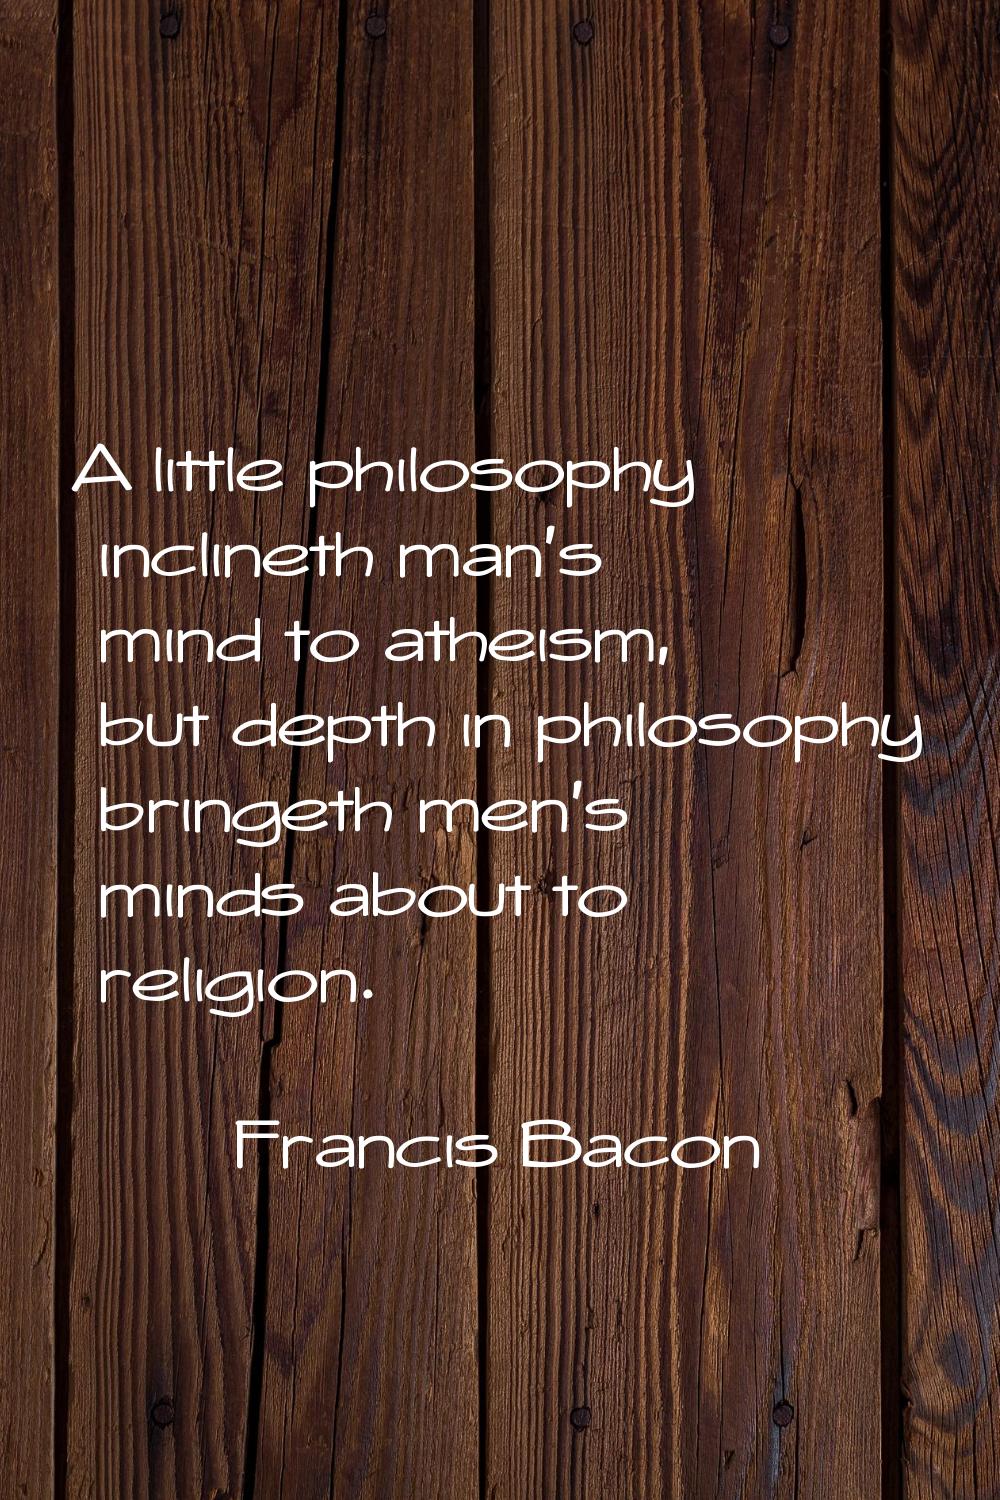 A little philosophy inclineth man's mind to atheism, but depth in philosophy bringeth men's minds a